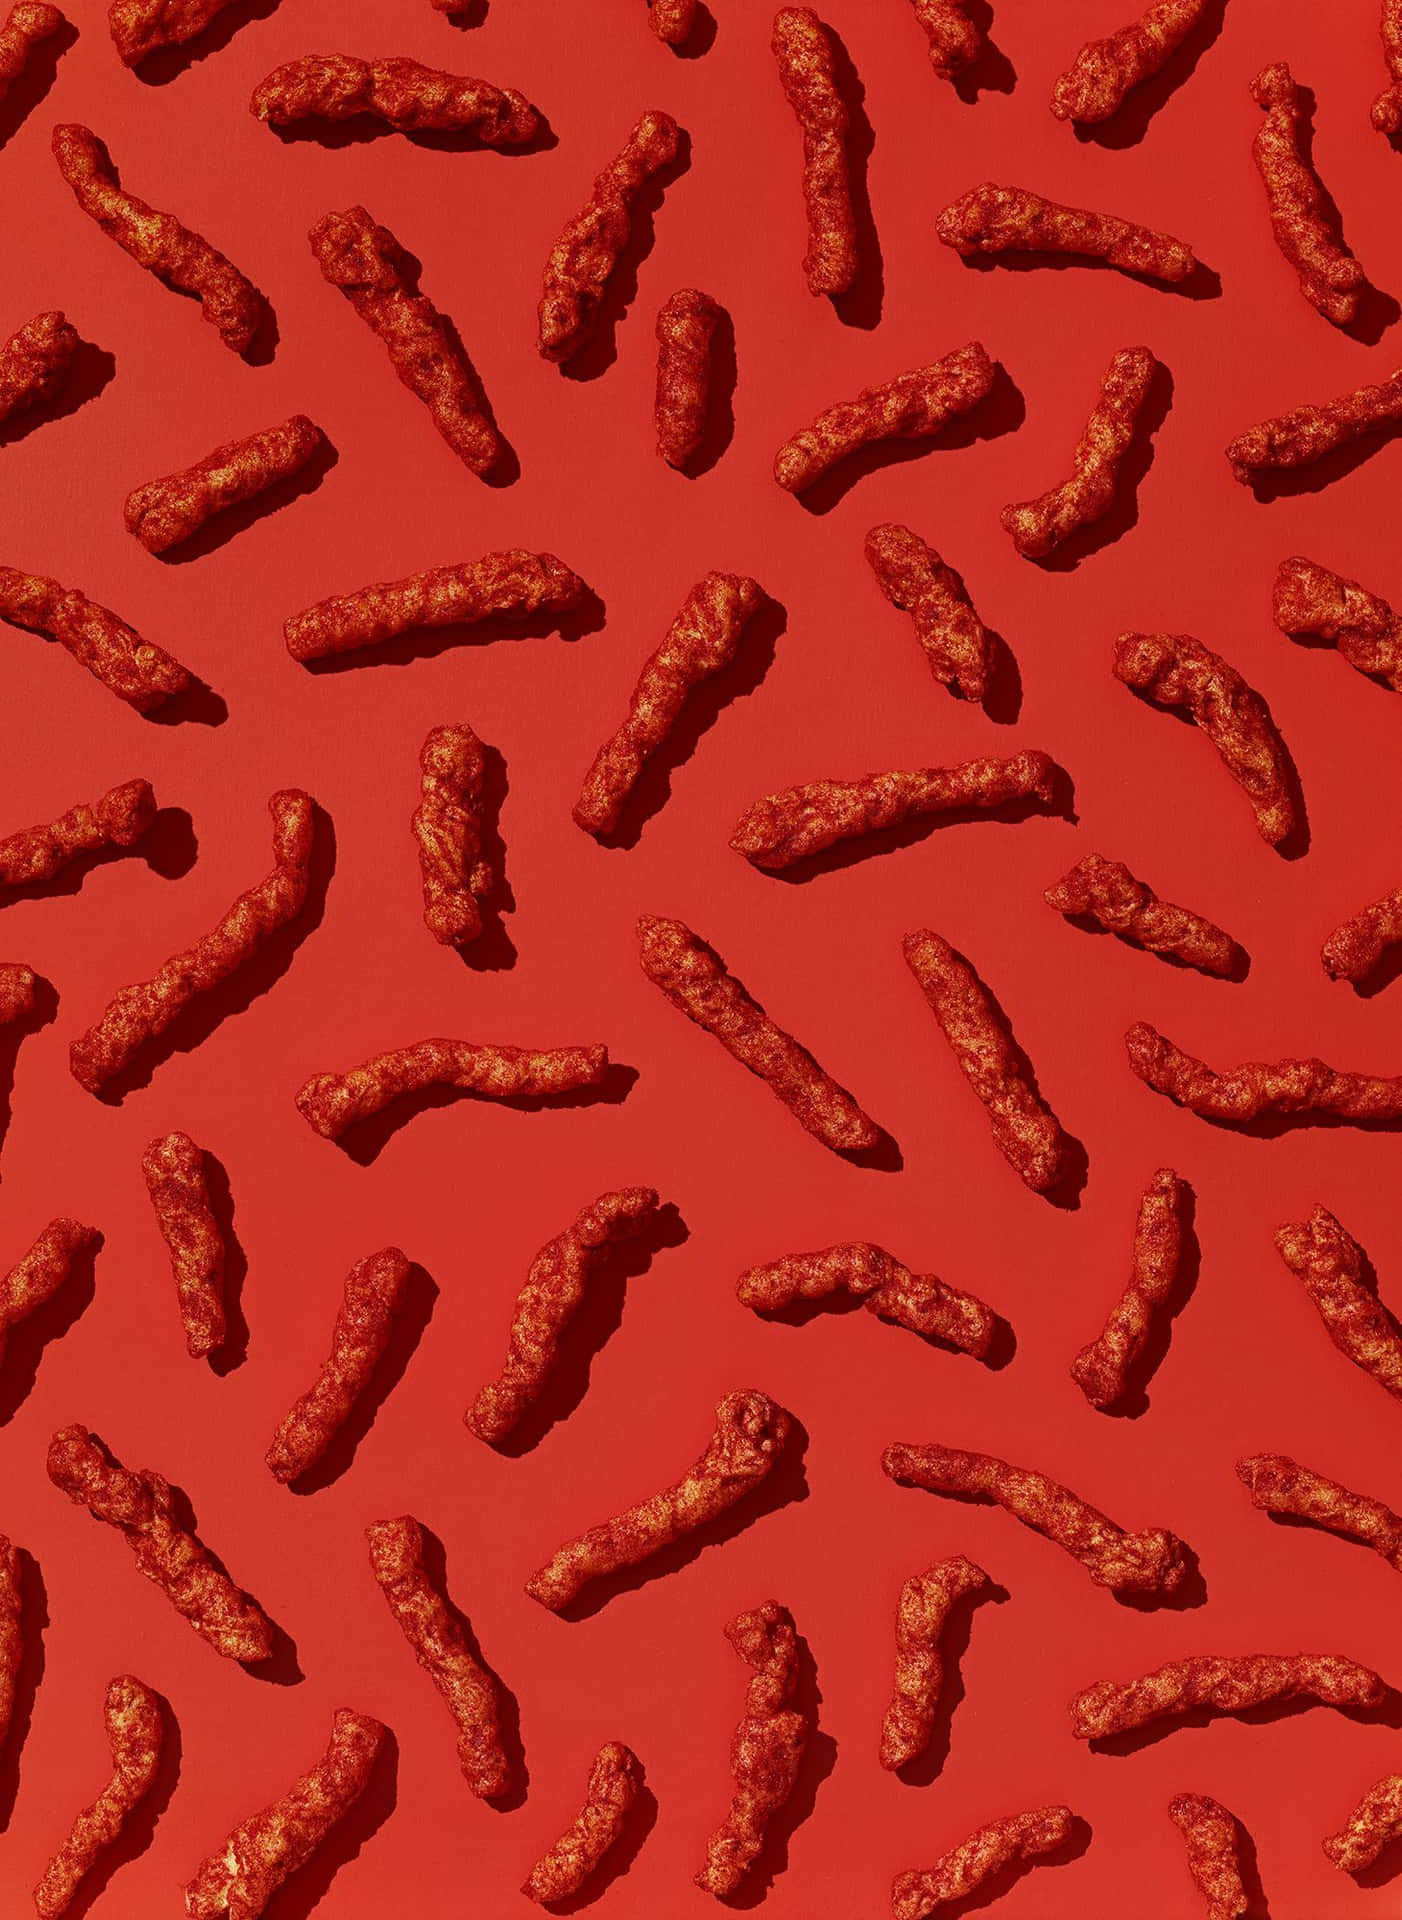 Download Add a Little Spice to Your Day With Hot Cheetos! Wallpaper